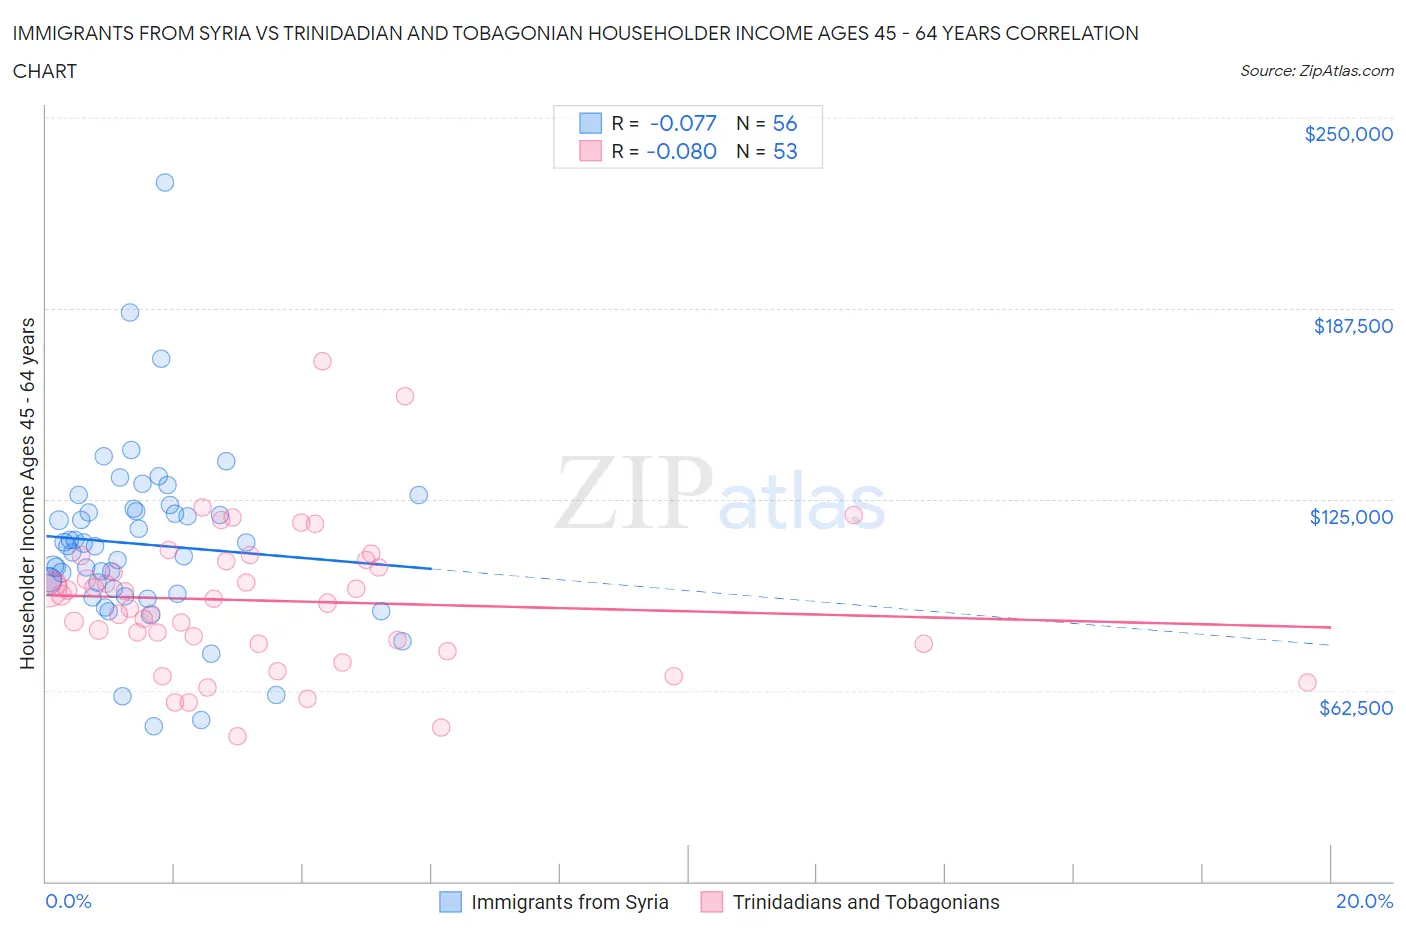 Immigrants from Syria vs Trinidadian and Tobagonian Householder Income Ages 45 - 64 years